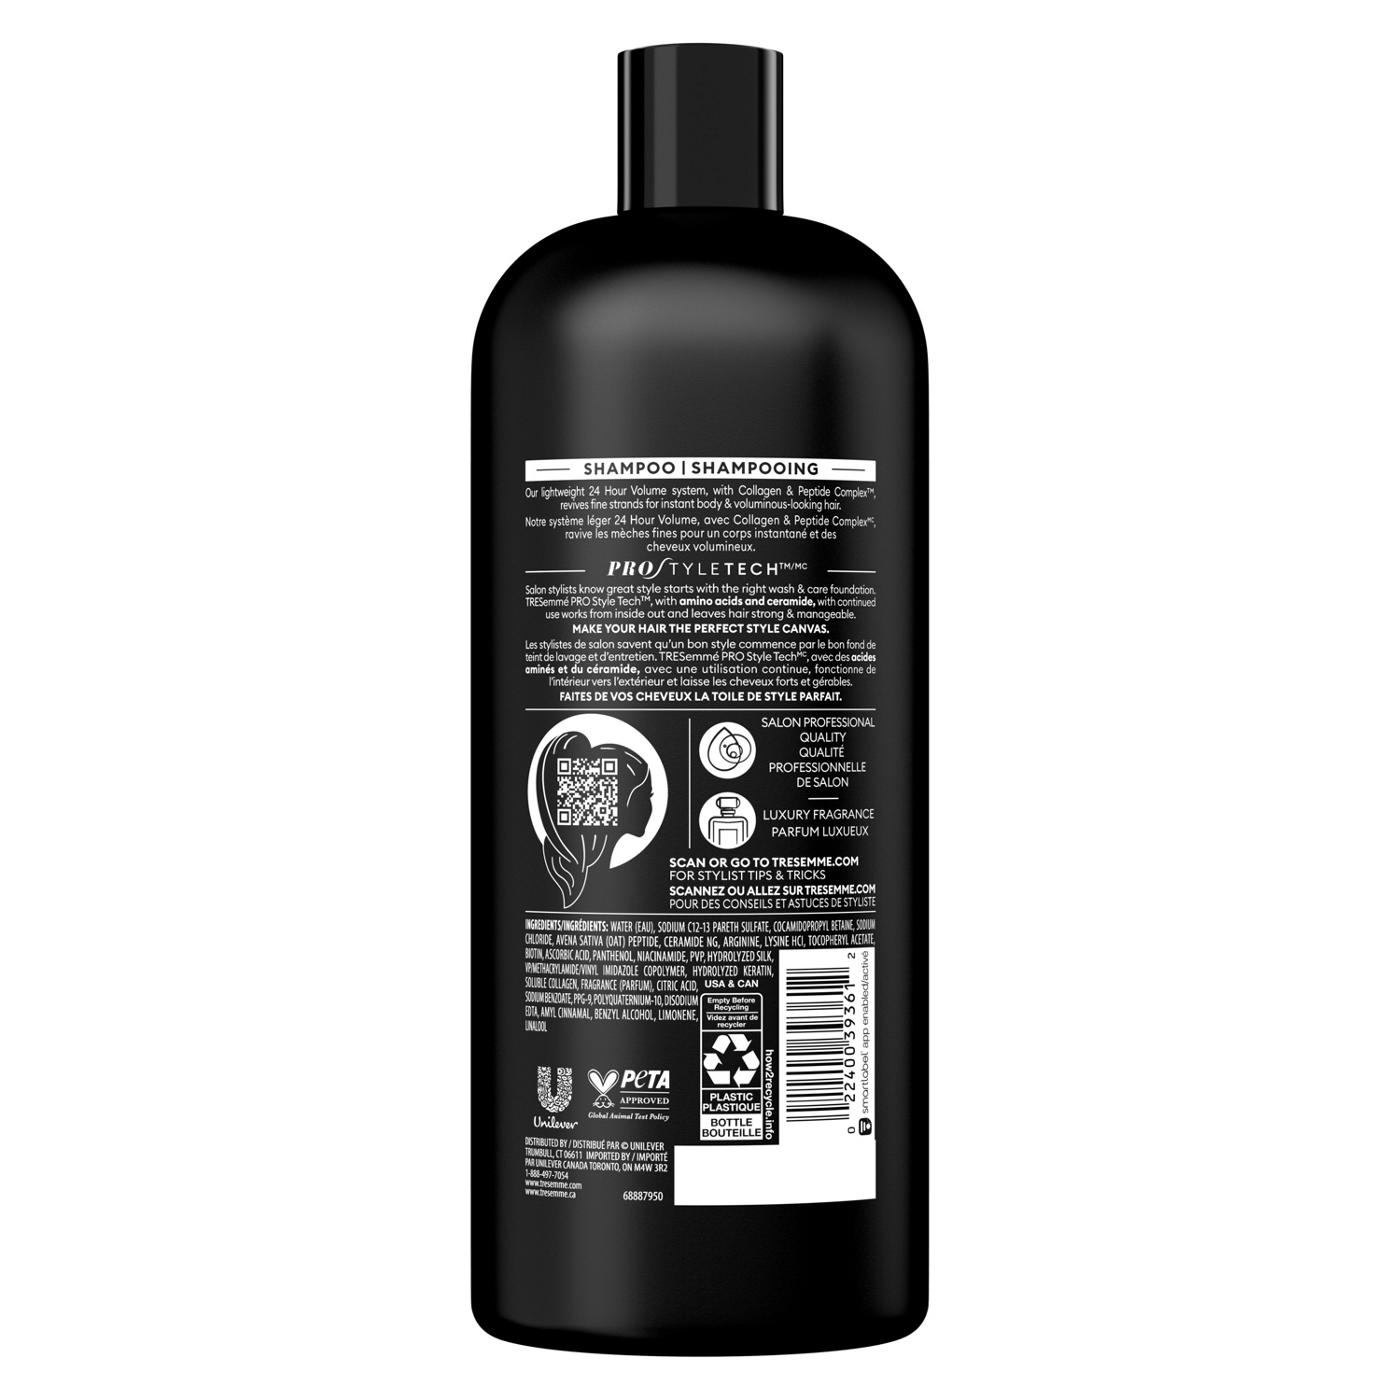 TRESemmé Pro Solutions 24 Hour Volume Thickening Shampoo; image 7 of 8